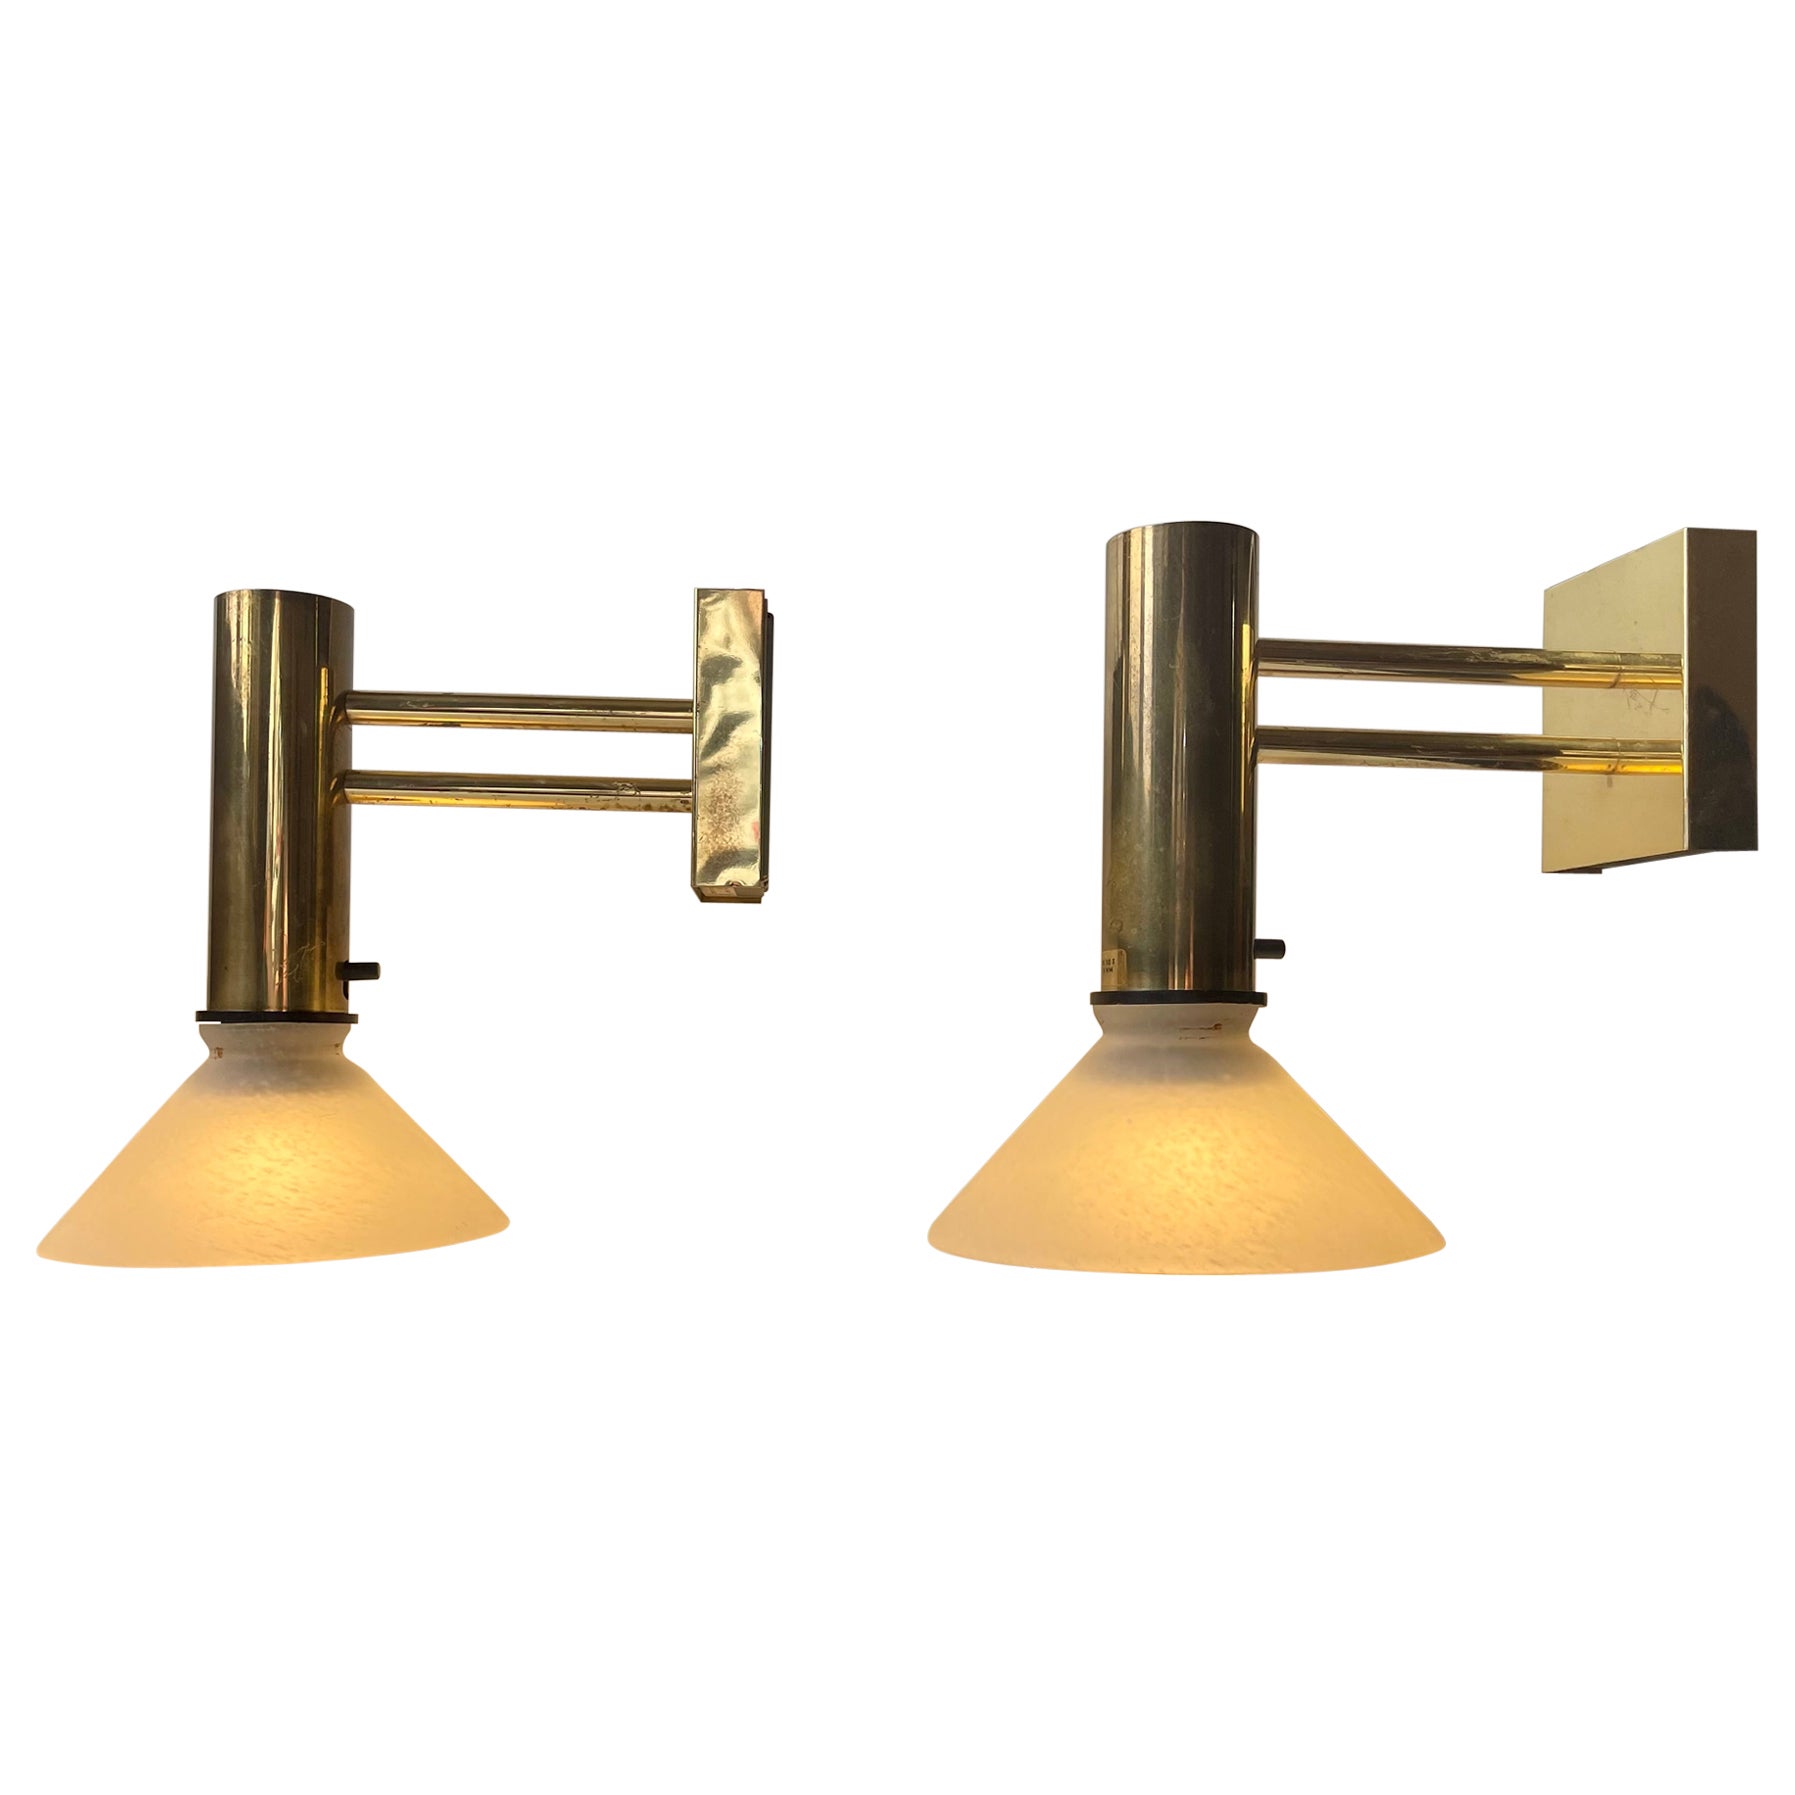 Vintage Nautical Norwegian Navy Brass Wall Sconces, 1970s For Sale